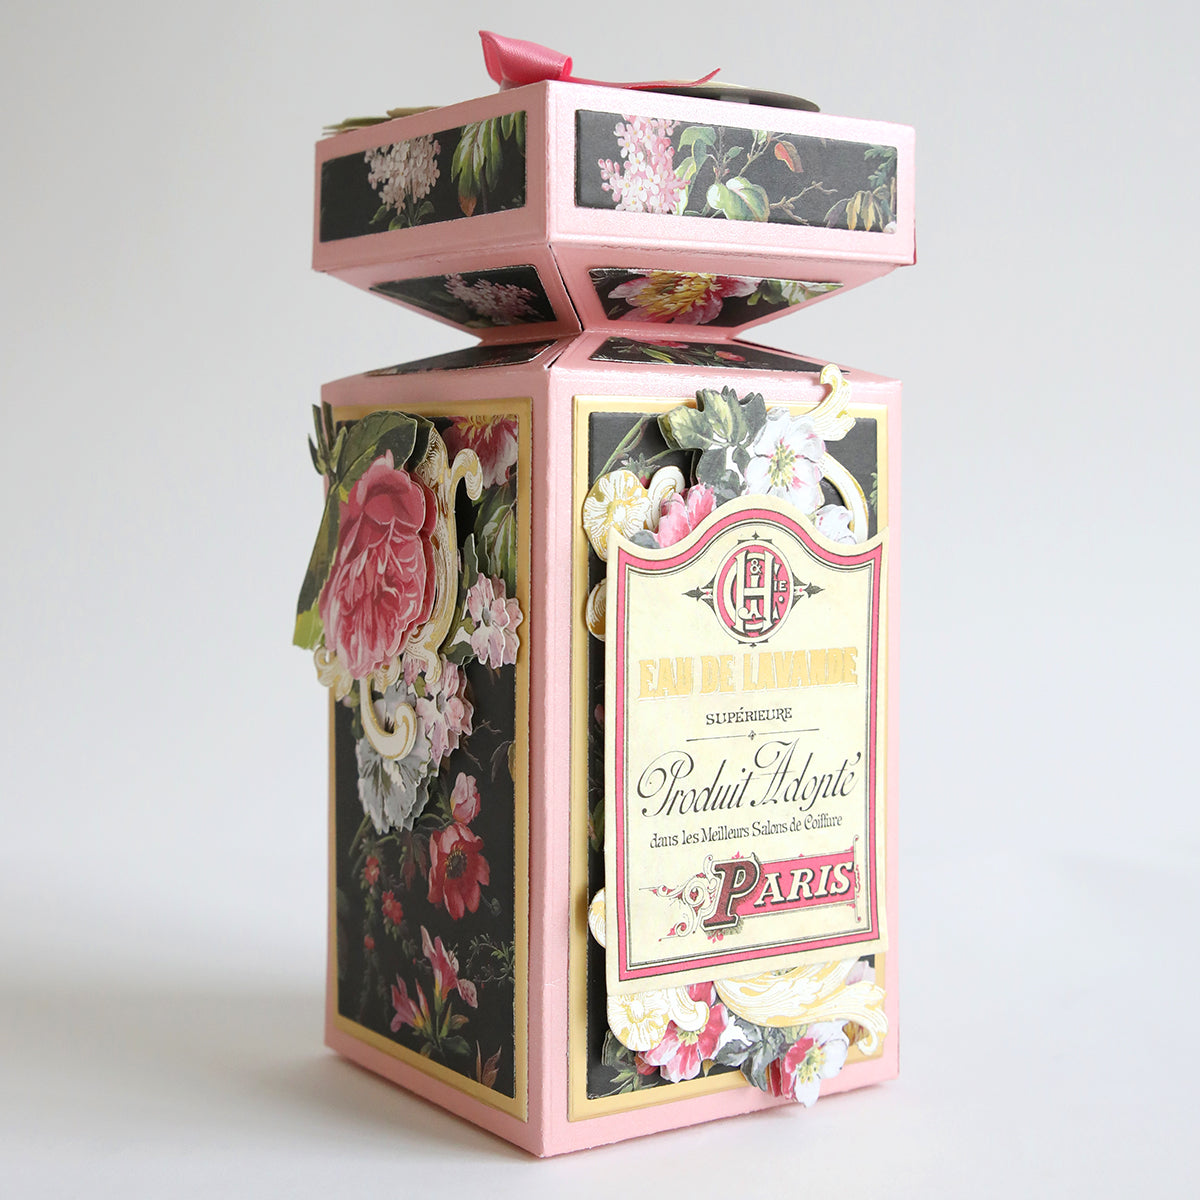 A pink box with a floral design on it, perfect for storing and gifting loved ones Perfume Box Dies.